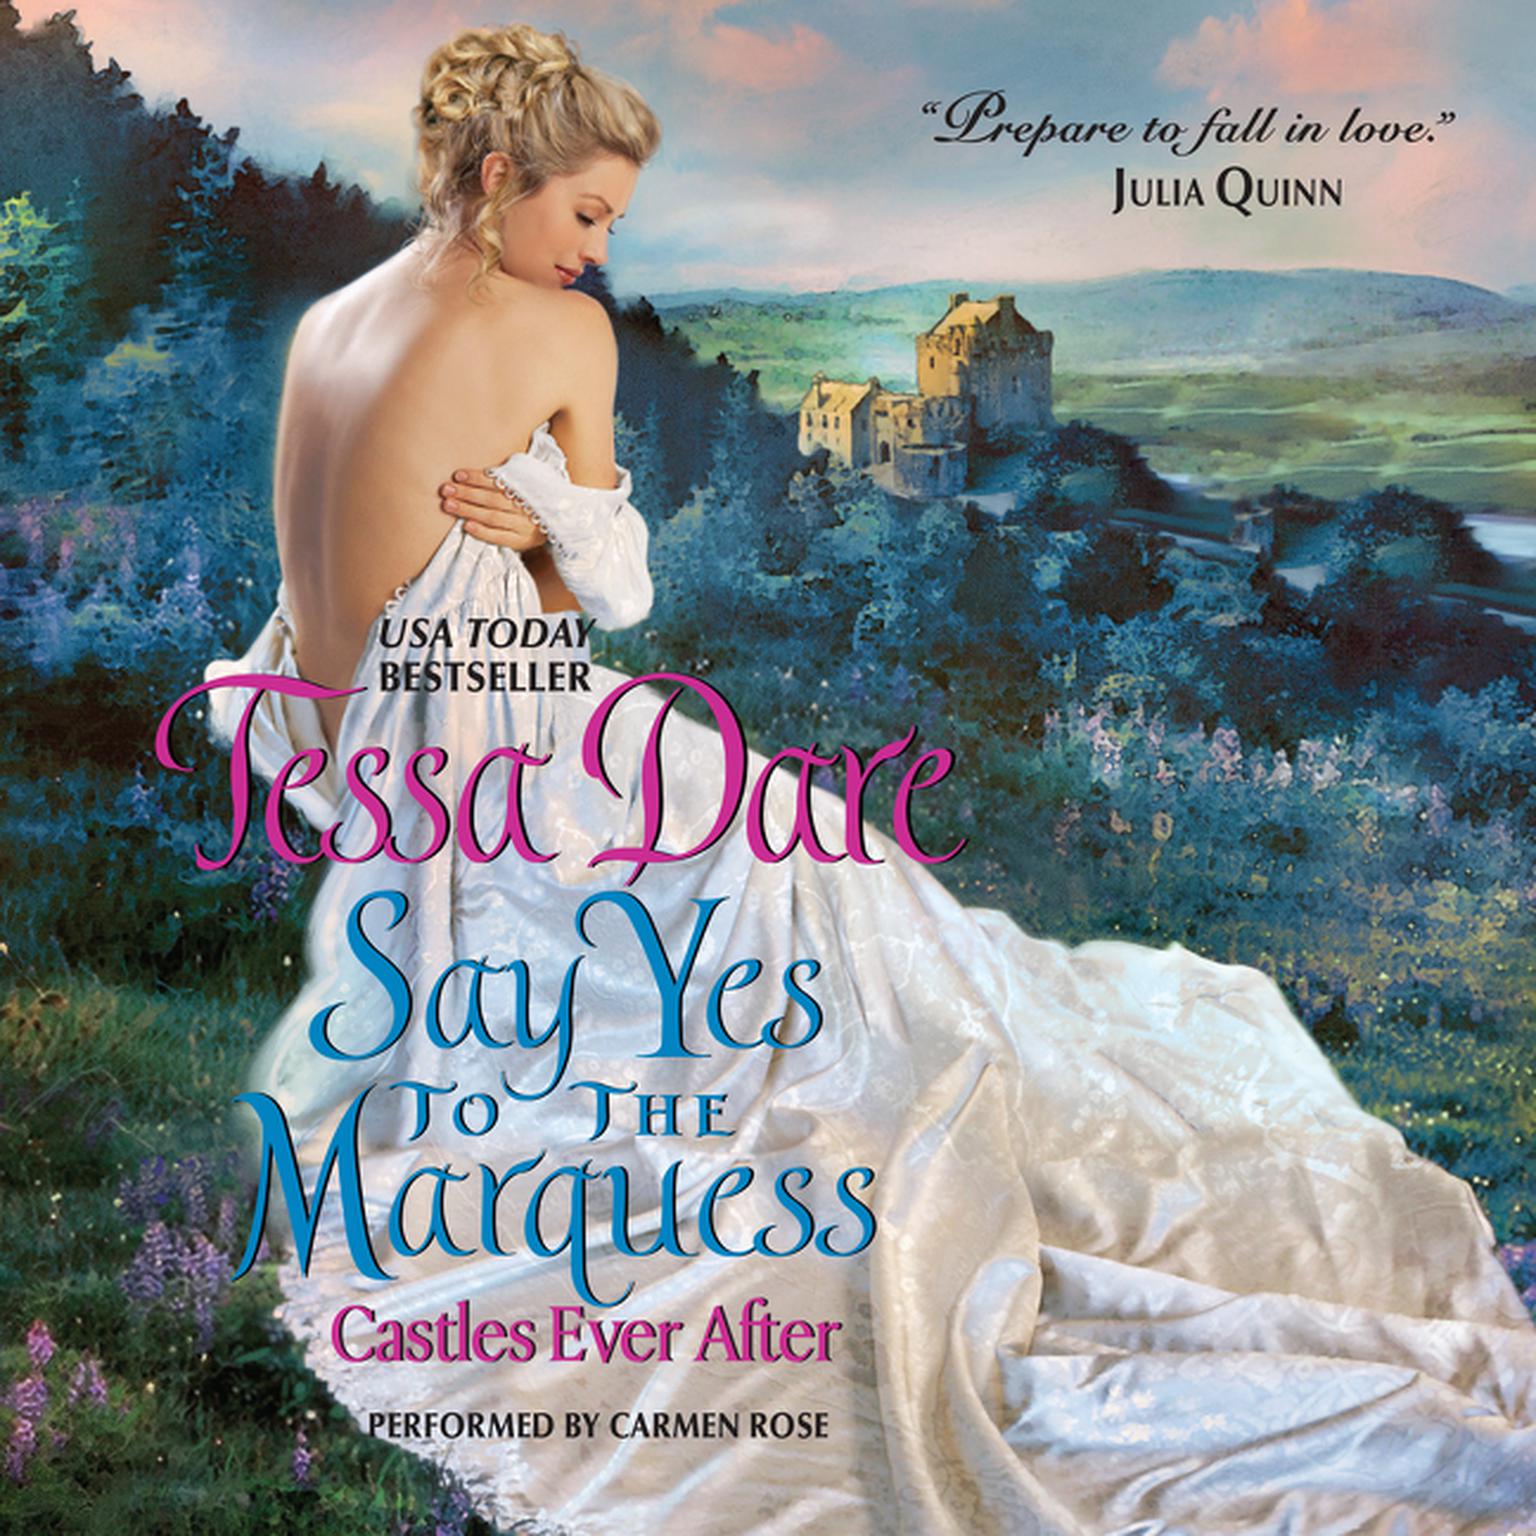 Say Yes to the Marquess (2015)